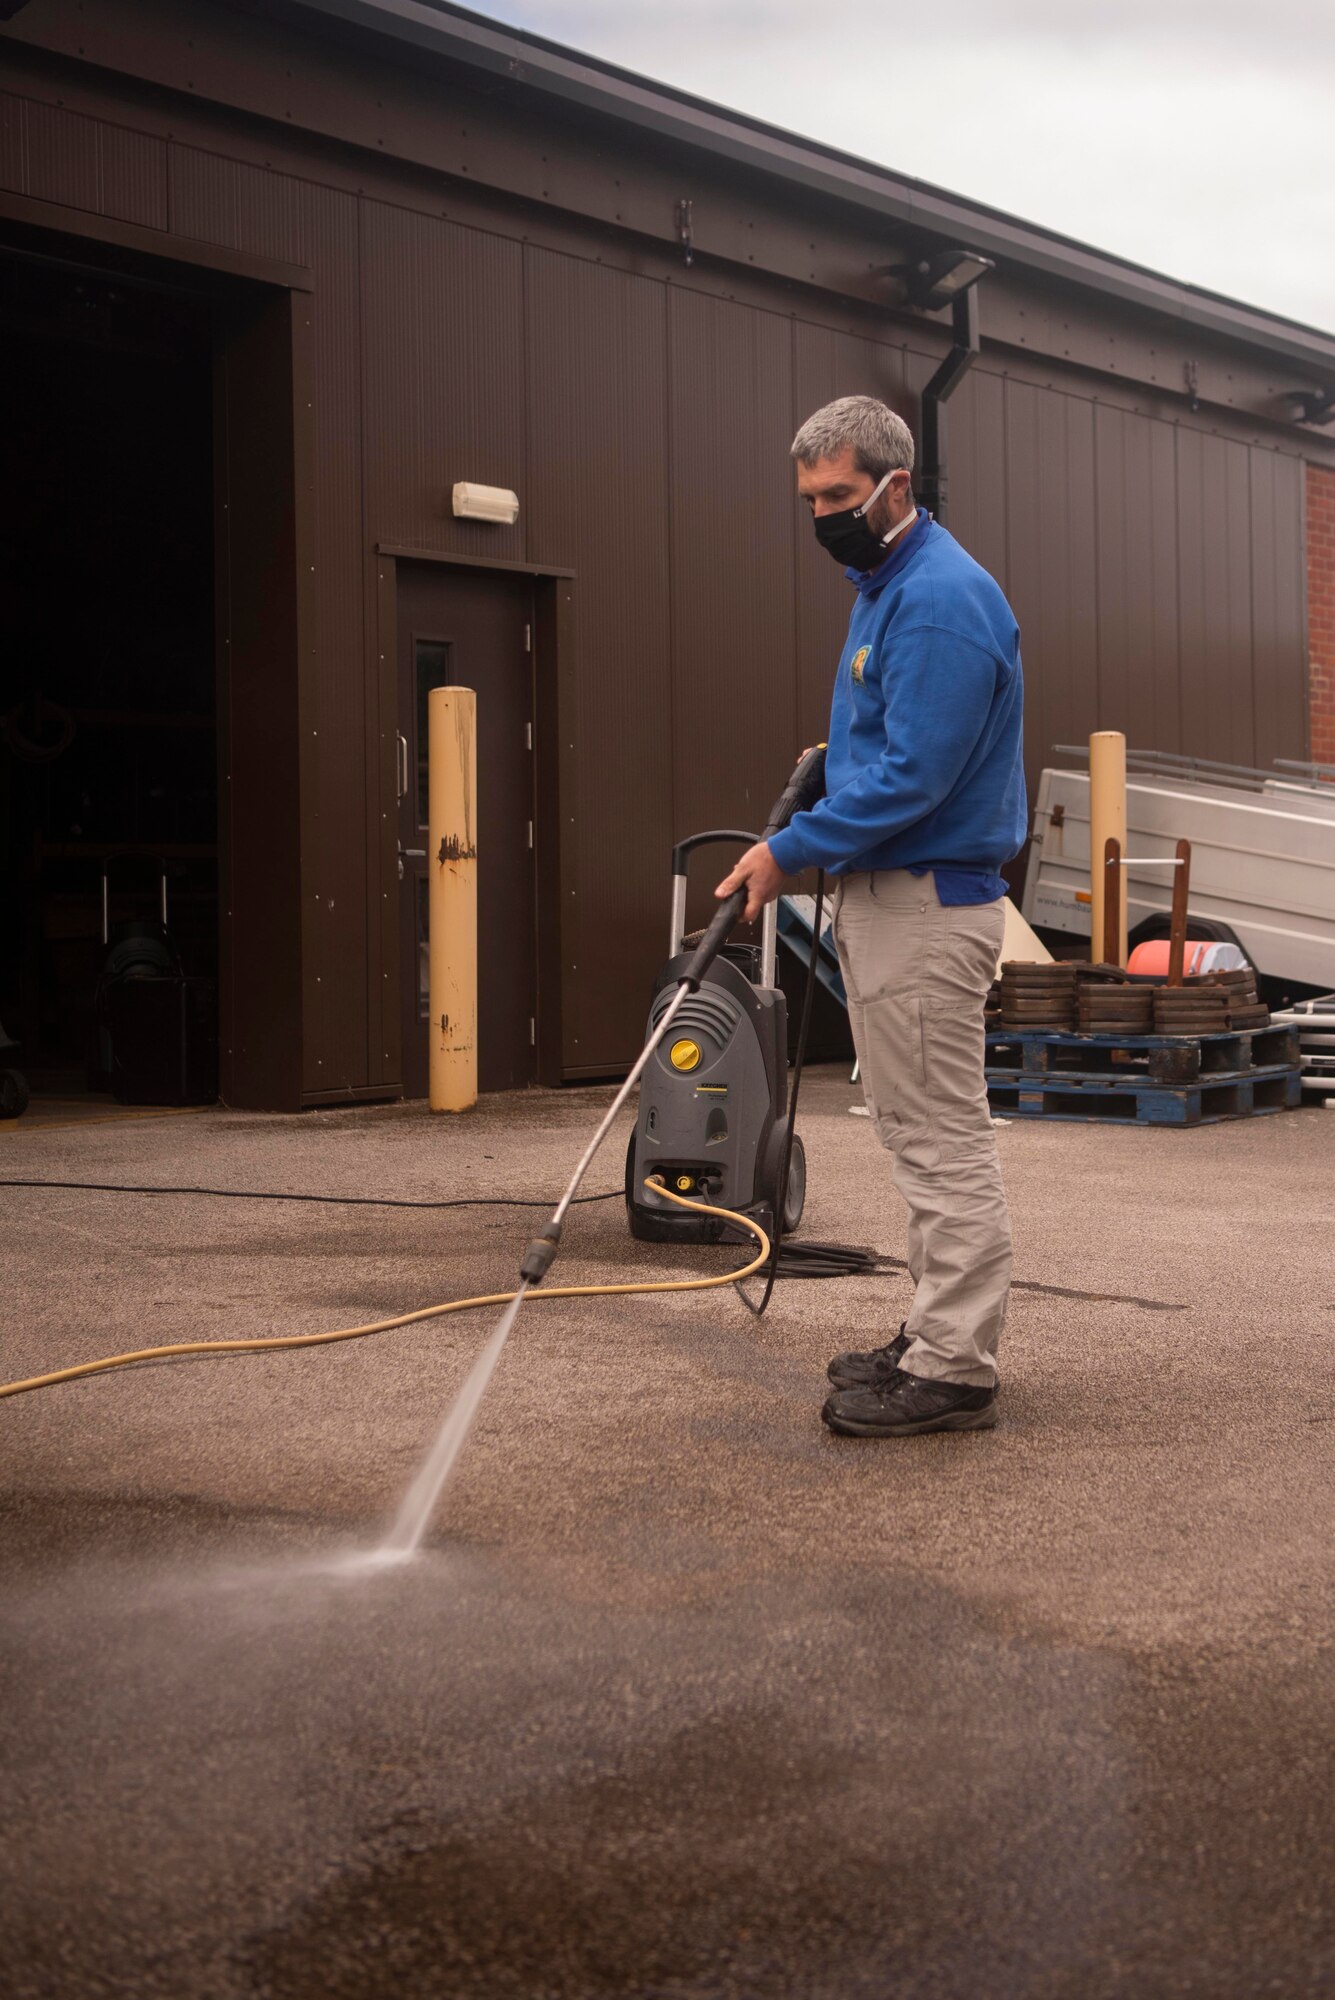 Keith Thomas, 100th Force Support Squadron Outdoor Recreation rental manager, tests the function of a pressure washer outside the outdoor recreation center at RAF Mildenhall, England, May 11, 2020. A variety of household tools and equipment are available to rent from the center for daily and weekly rates. (U.S. Air Force photo by Airman 1st Class Joseph Barron)